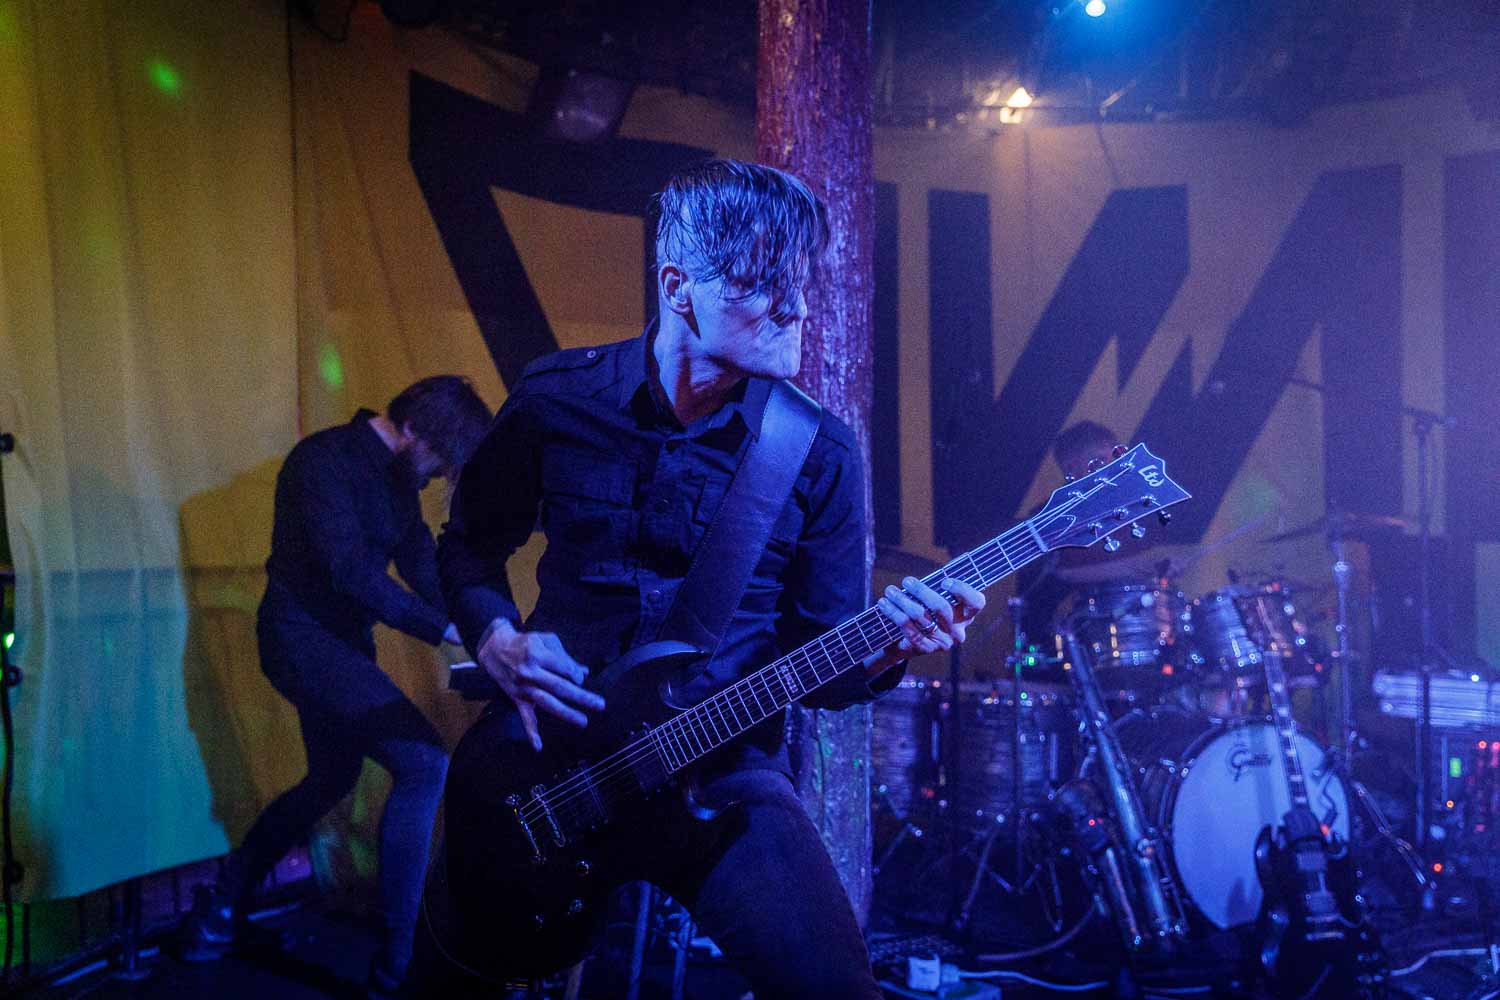 Shining live at Satan's Hollow in Manchester